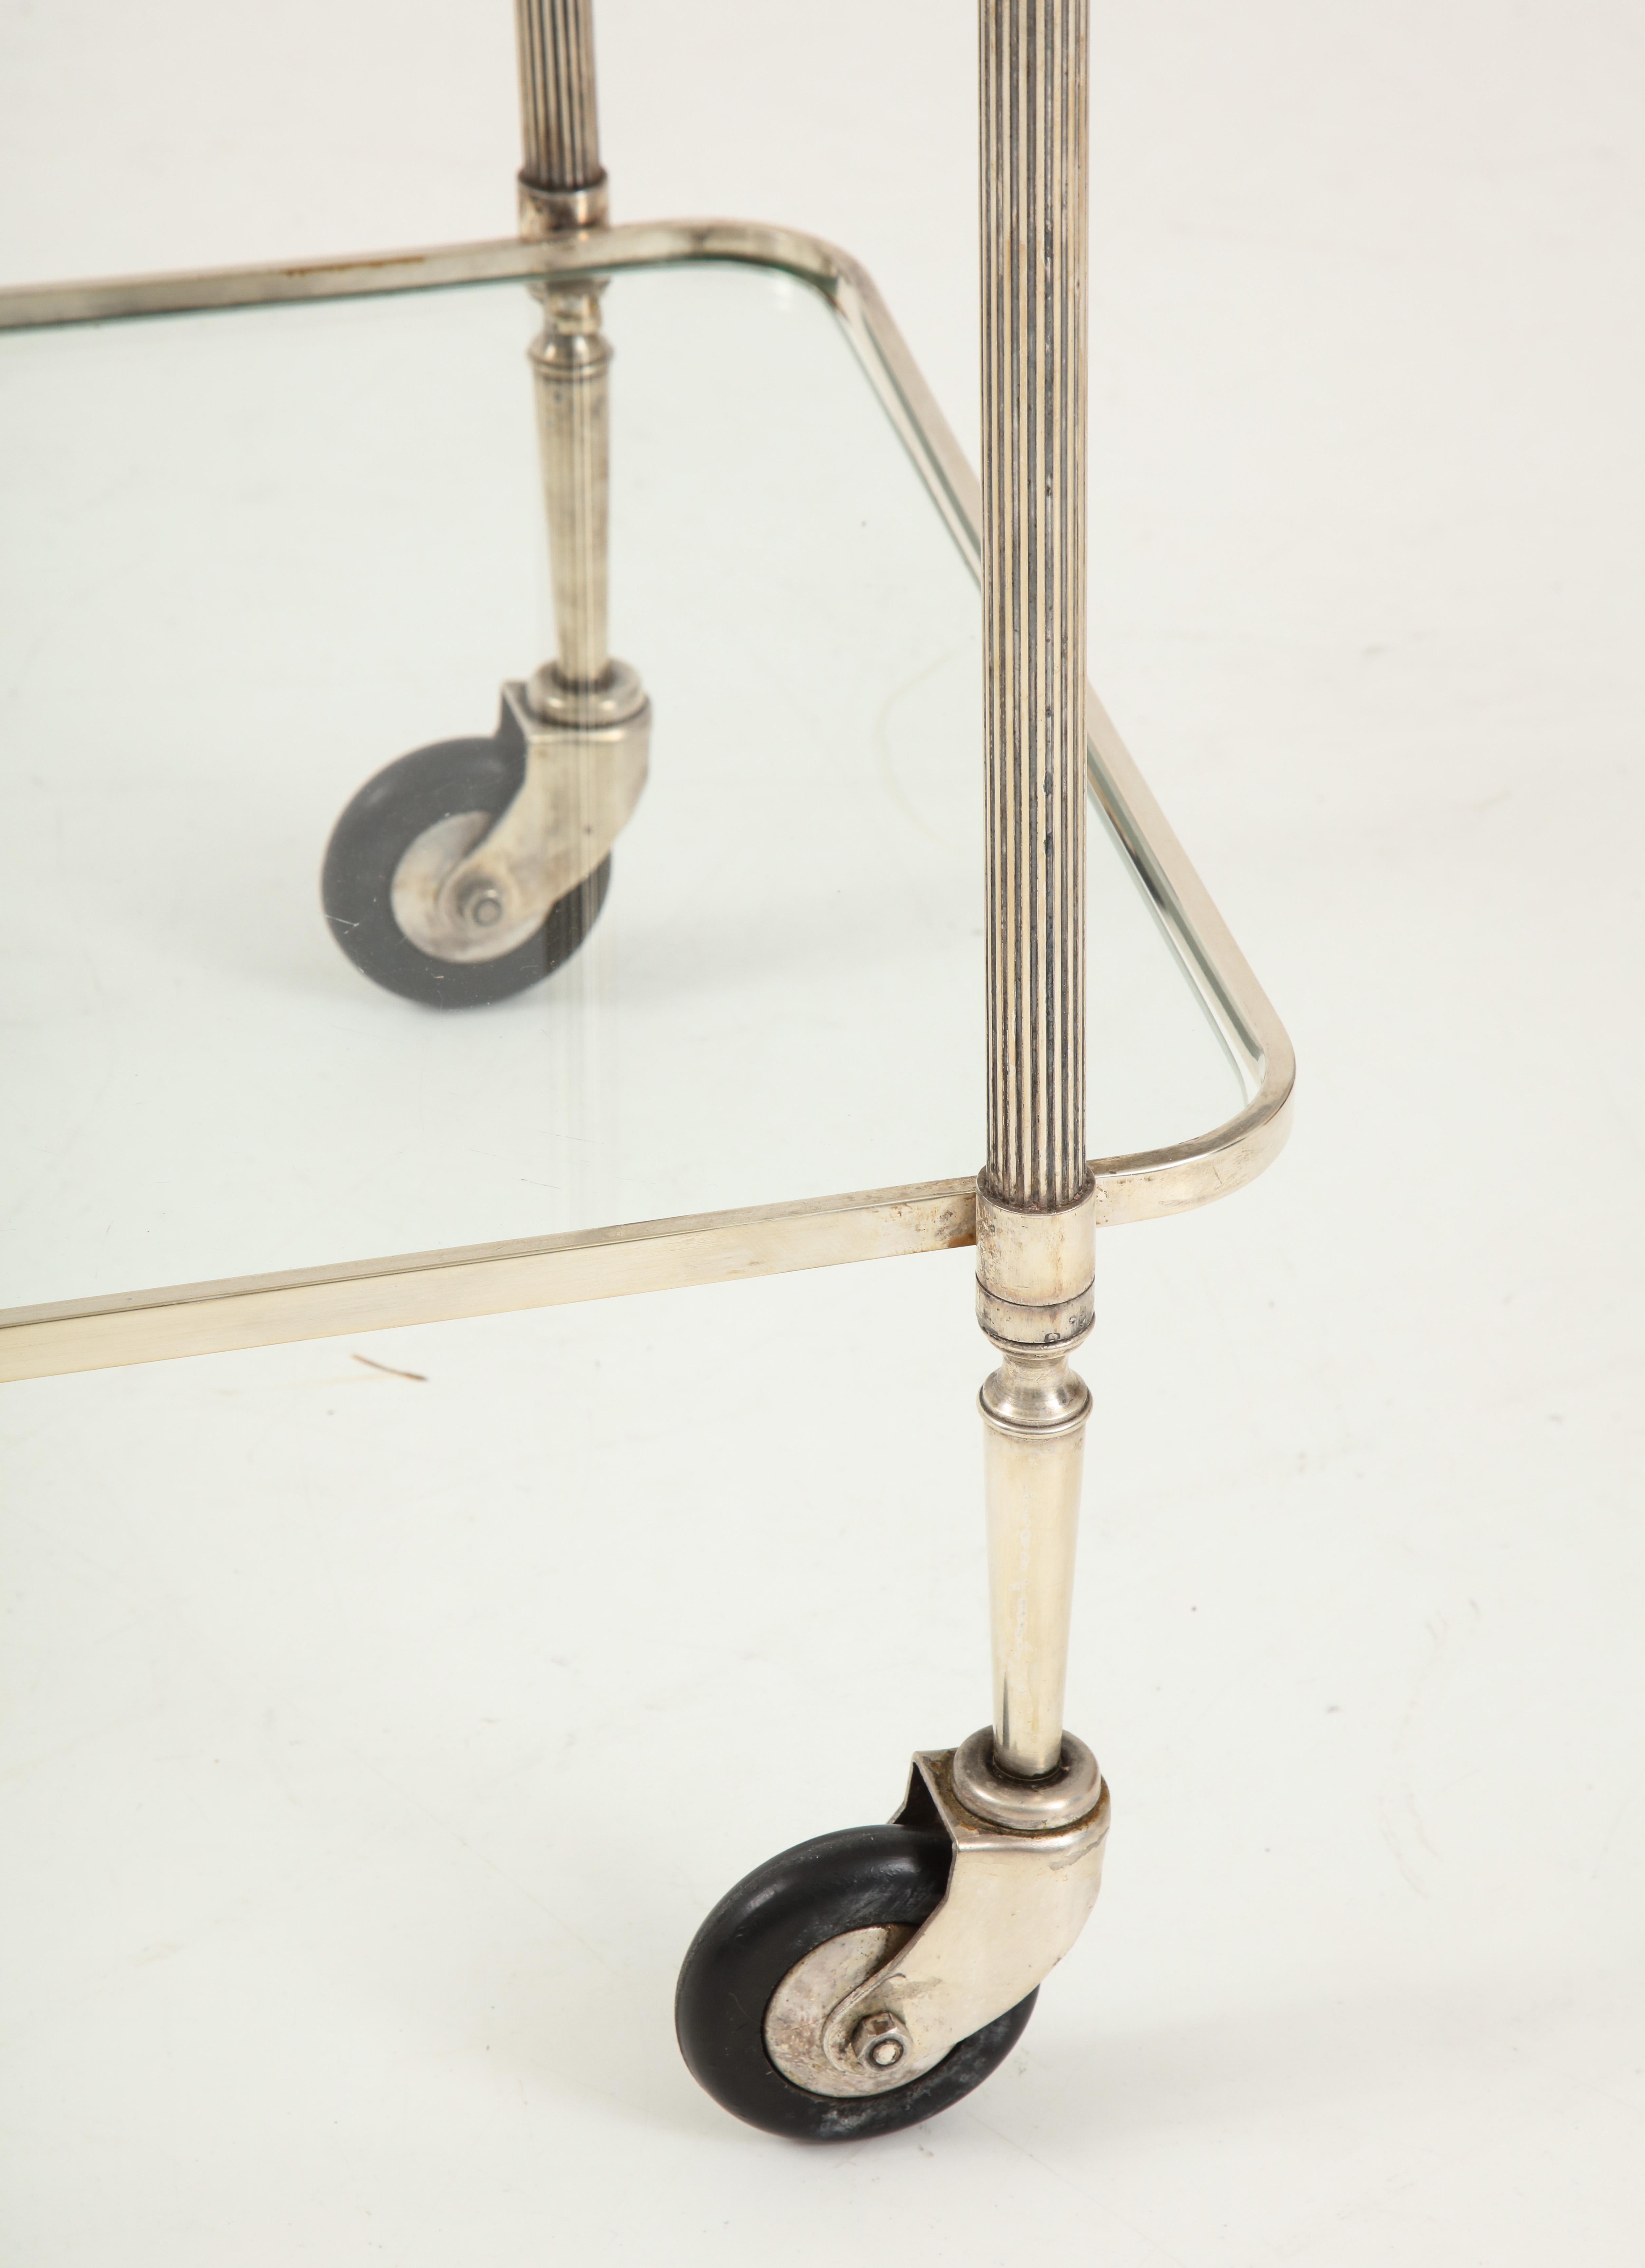 A chic bar cart in polished Nicke with a lower glass shelf and a removable upper tray with a gallery. This gem features lovely details, including reeded legs and handle as well as charming acorn finials. Its size make it quite versatile and useful.